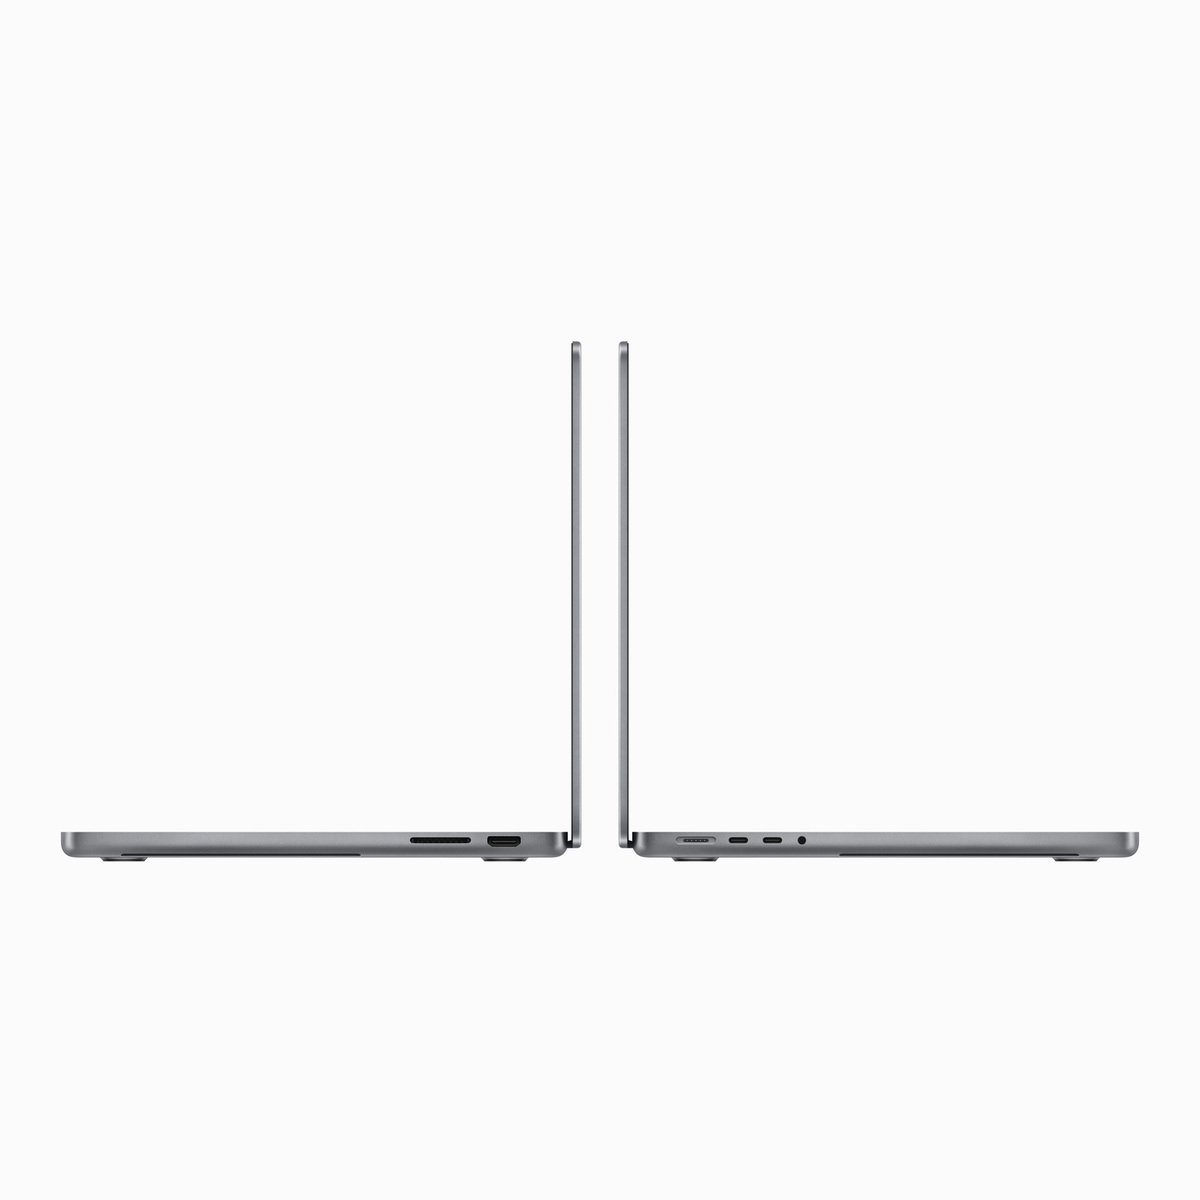 Apple MacBook Pro M3 Chip, 14 inches, 8 GB RAM, 512 GB Storage, Space Gray, MTL73AB/A